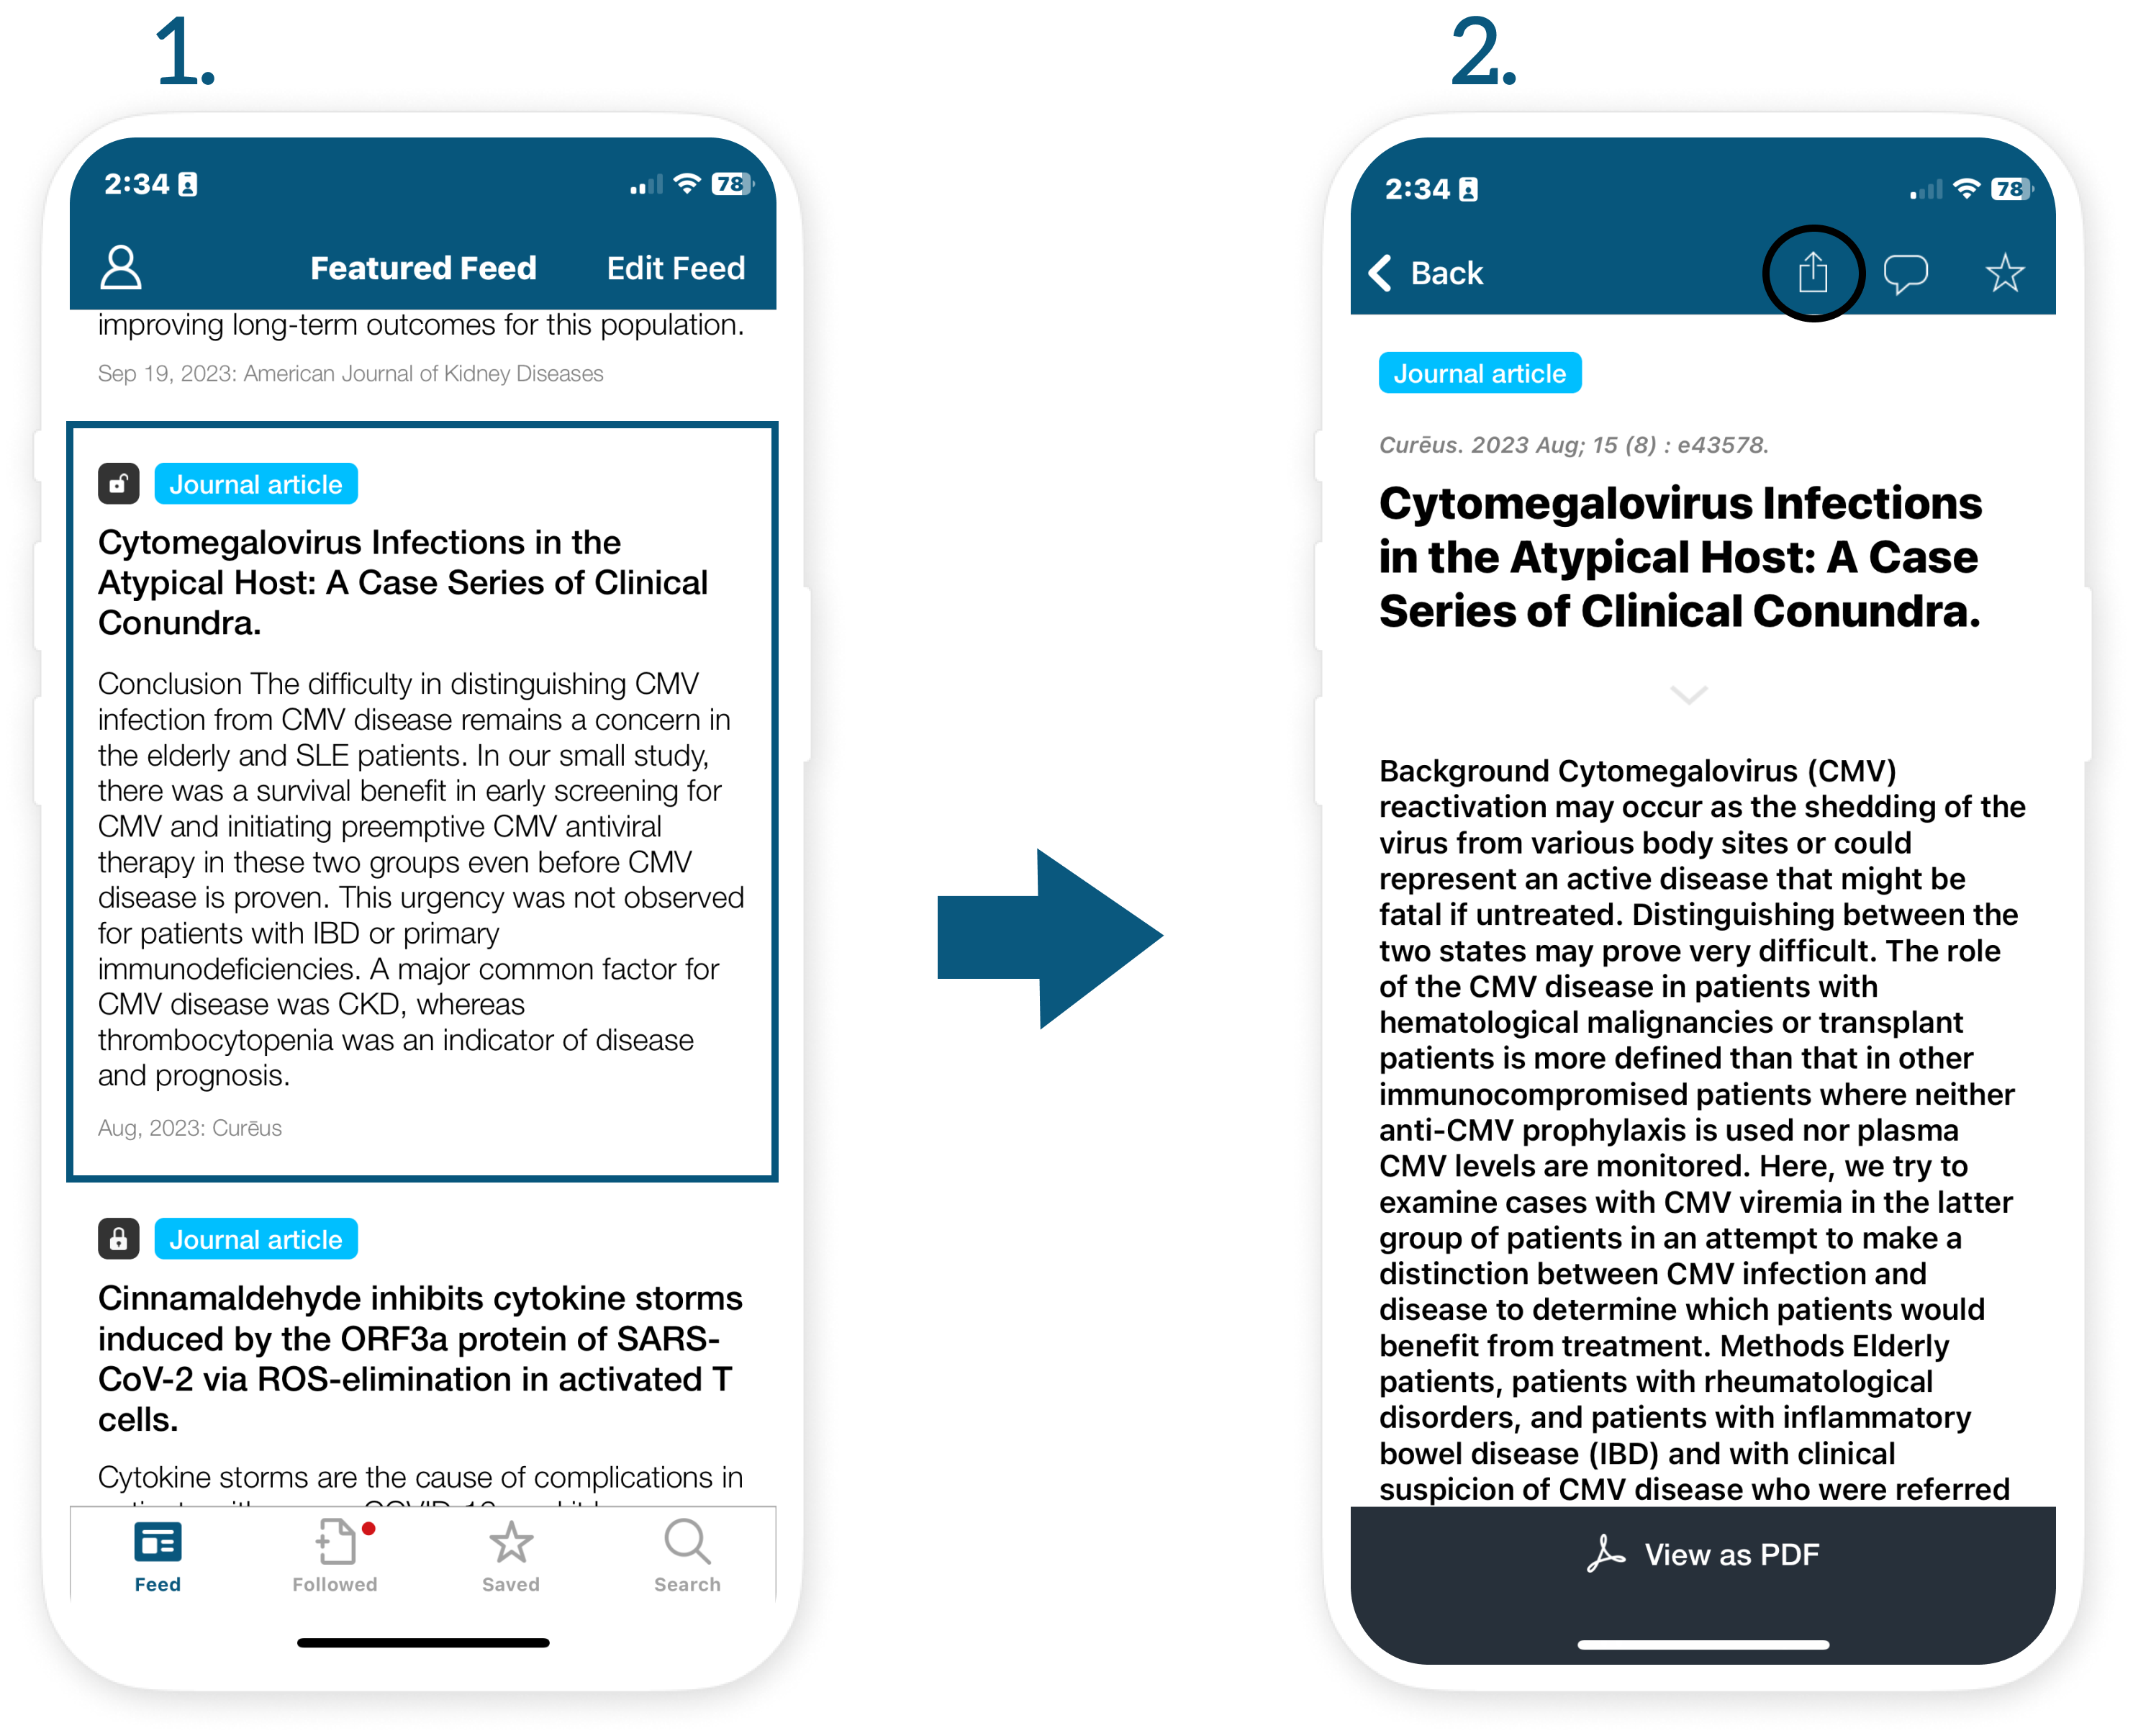 How to Use Citation Managers with Read - IOS A.png